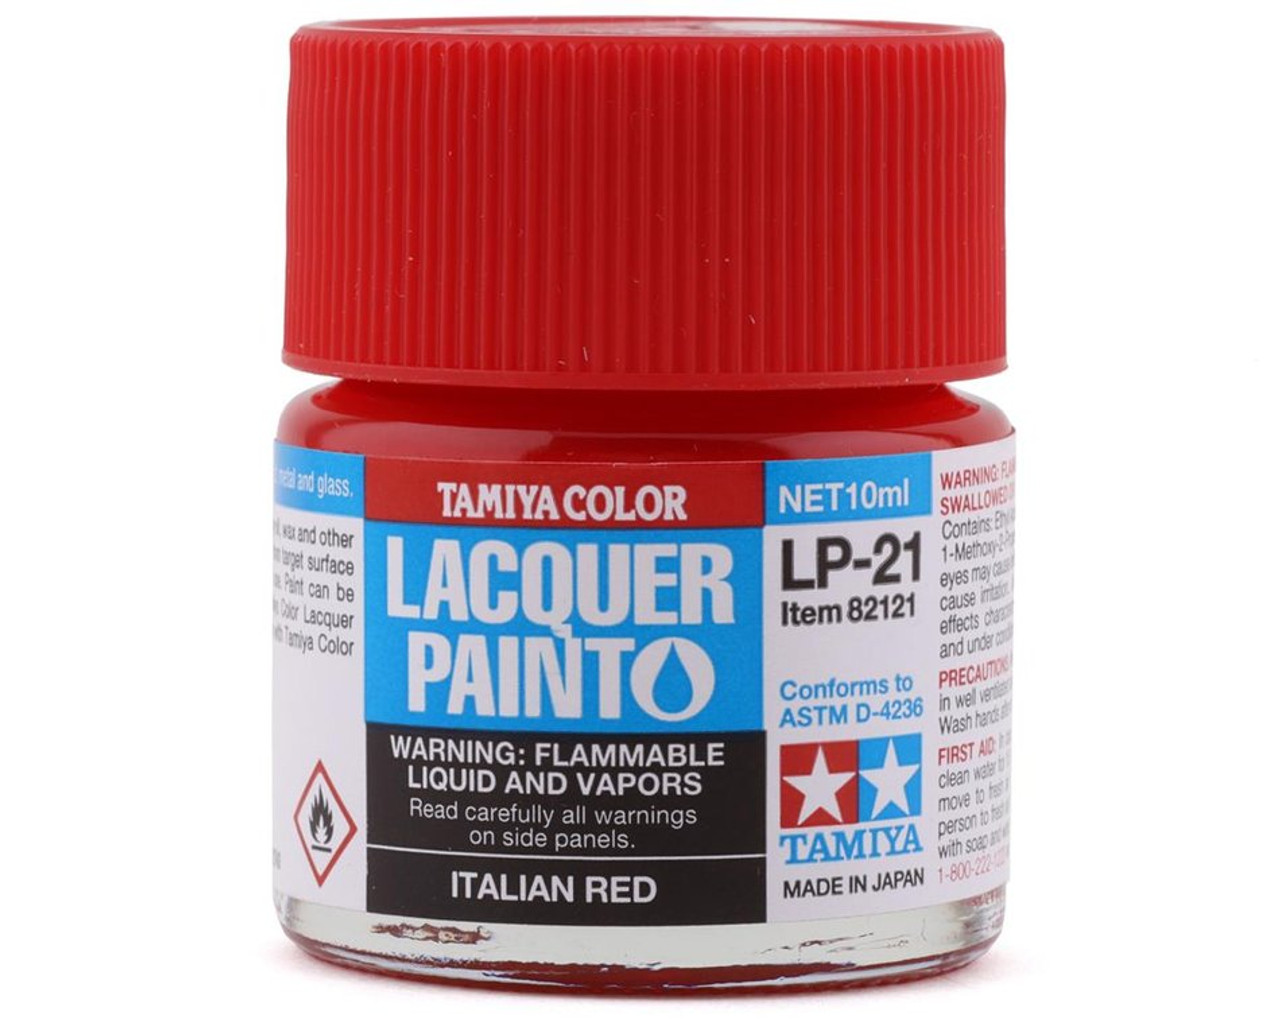 Tamiya 82121 Lacquer Paint LP-21 Italian Red 10ml Bottle